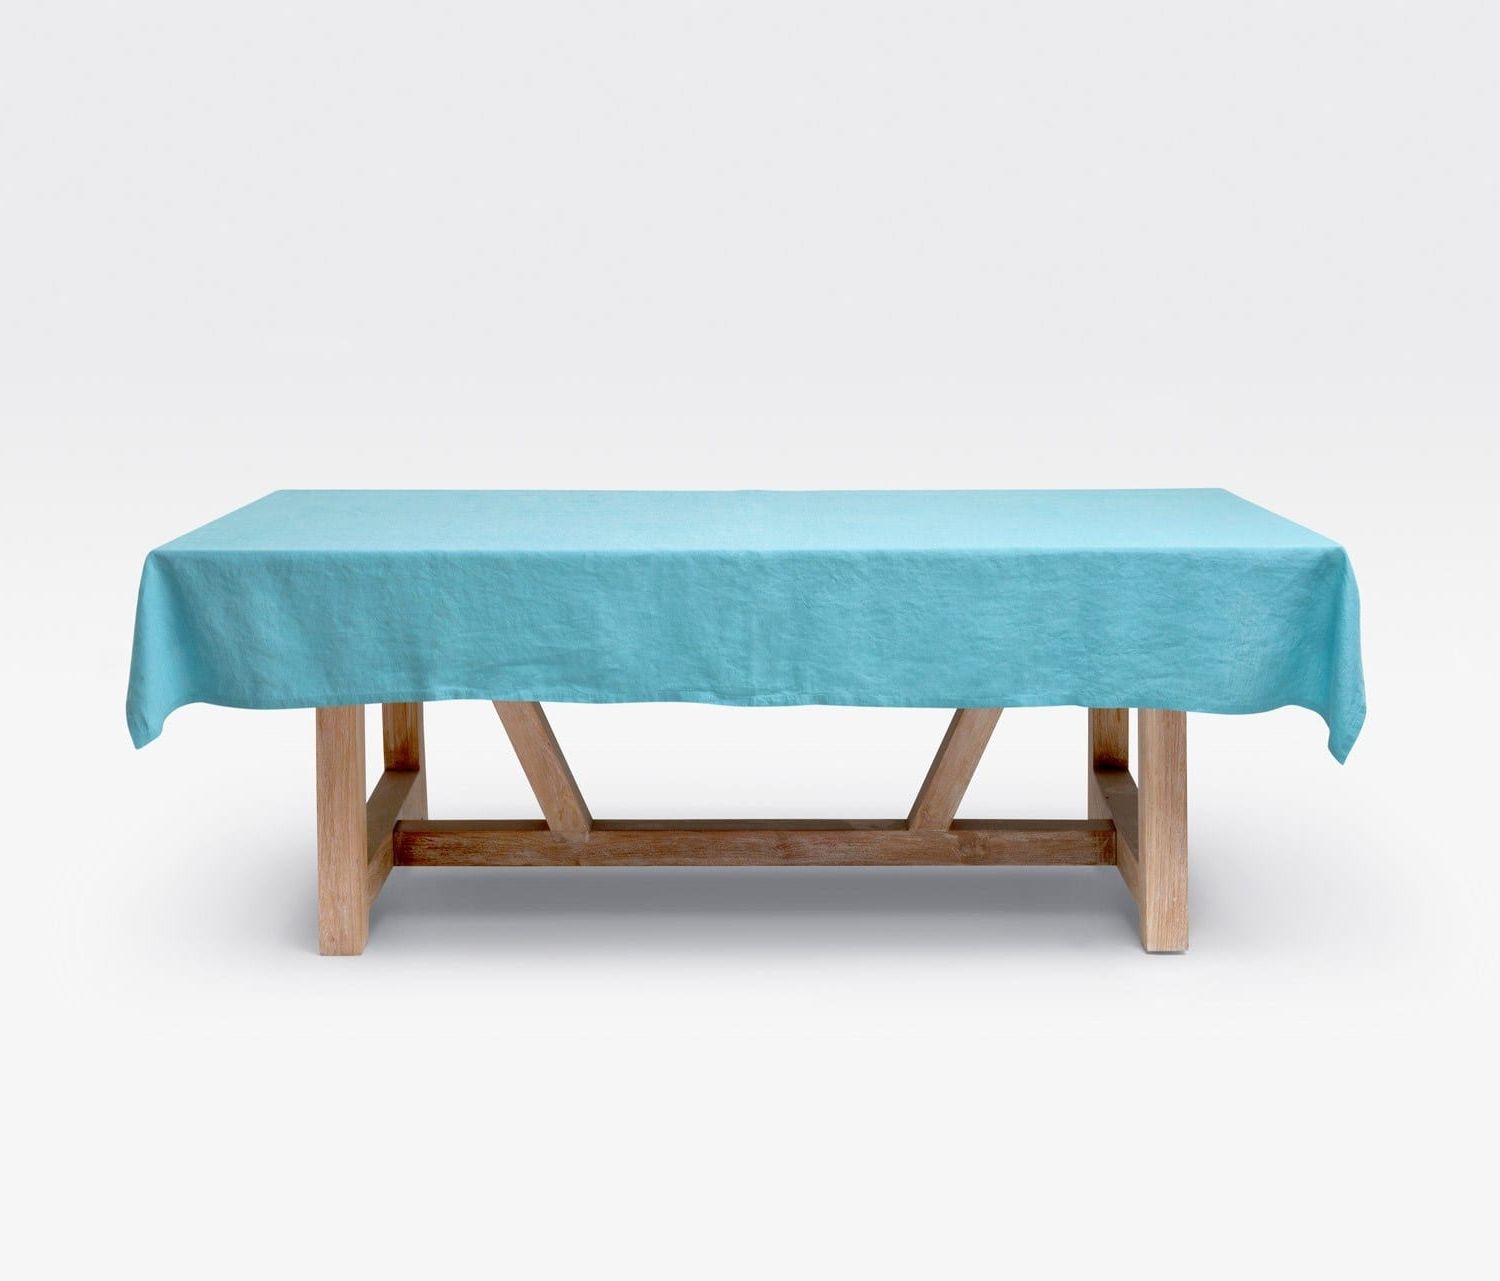 Favorite Murphey Rectangle 112" L X 40" W Tables Inside Johanna Blue 112"l X 70"w Rectangular Tablecloth – Harbour (View 12 of 20)